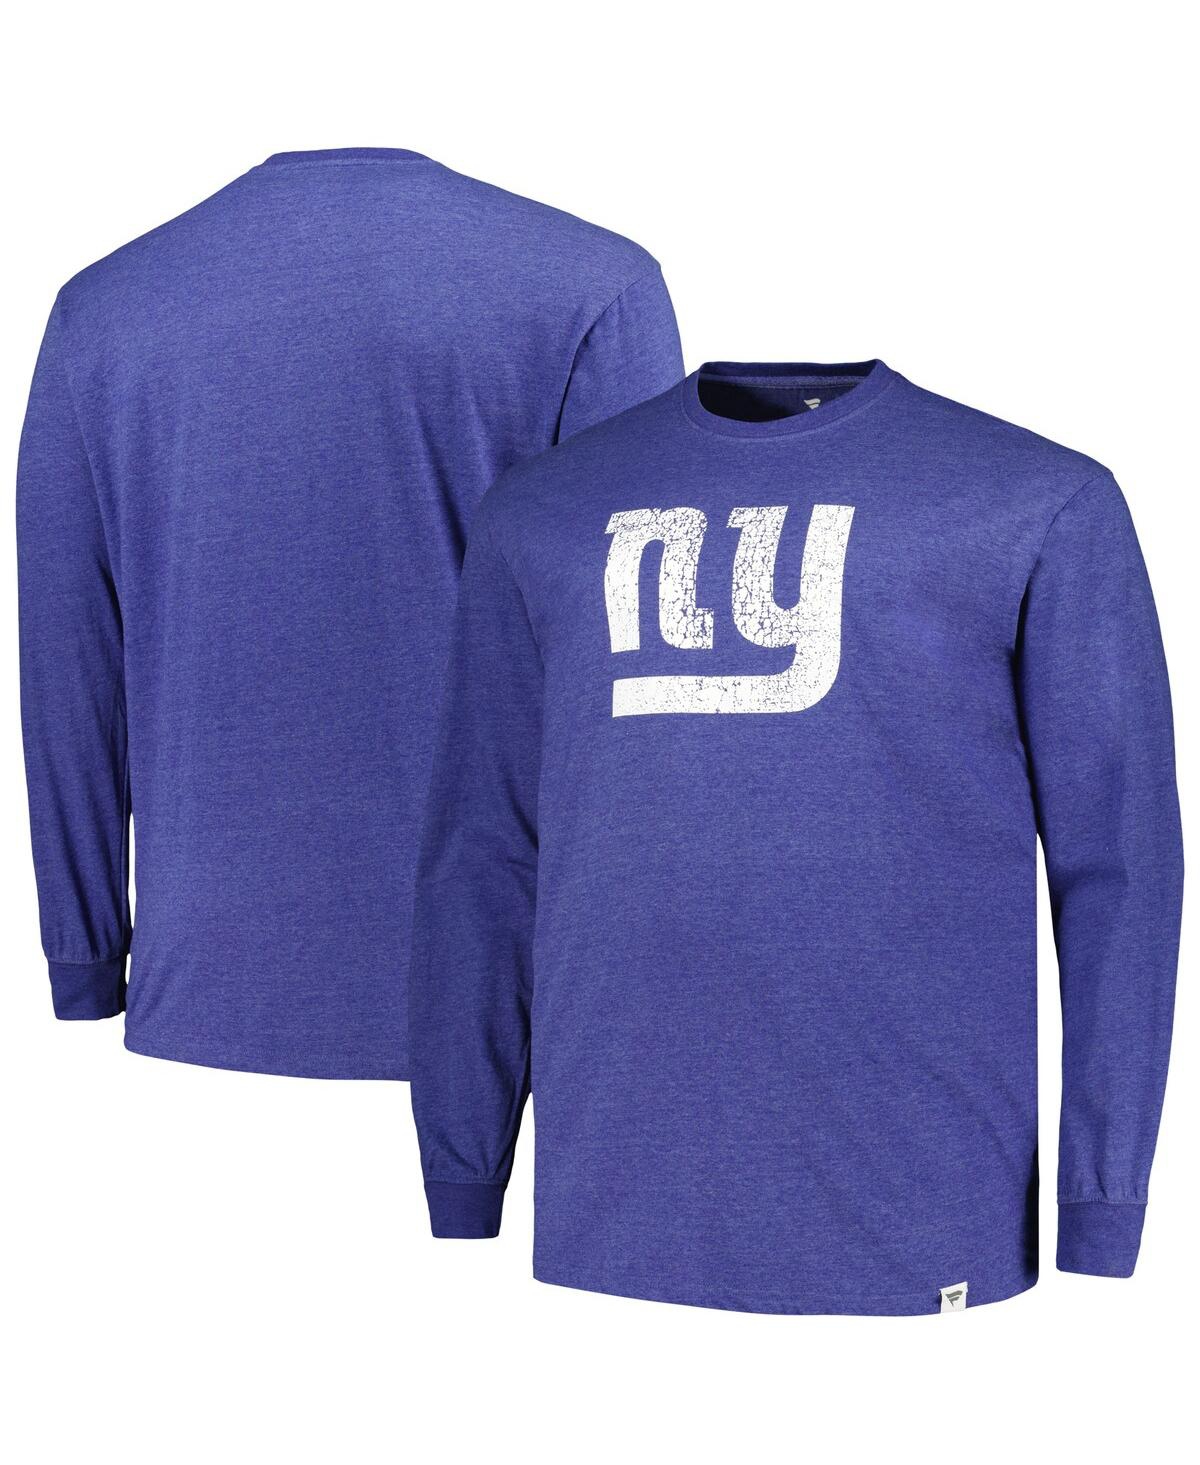 Shop Profile Men's  Heather Royal Distressed New York Giants Big And Tall Throwback Long Sleeve T-shirt